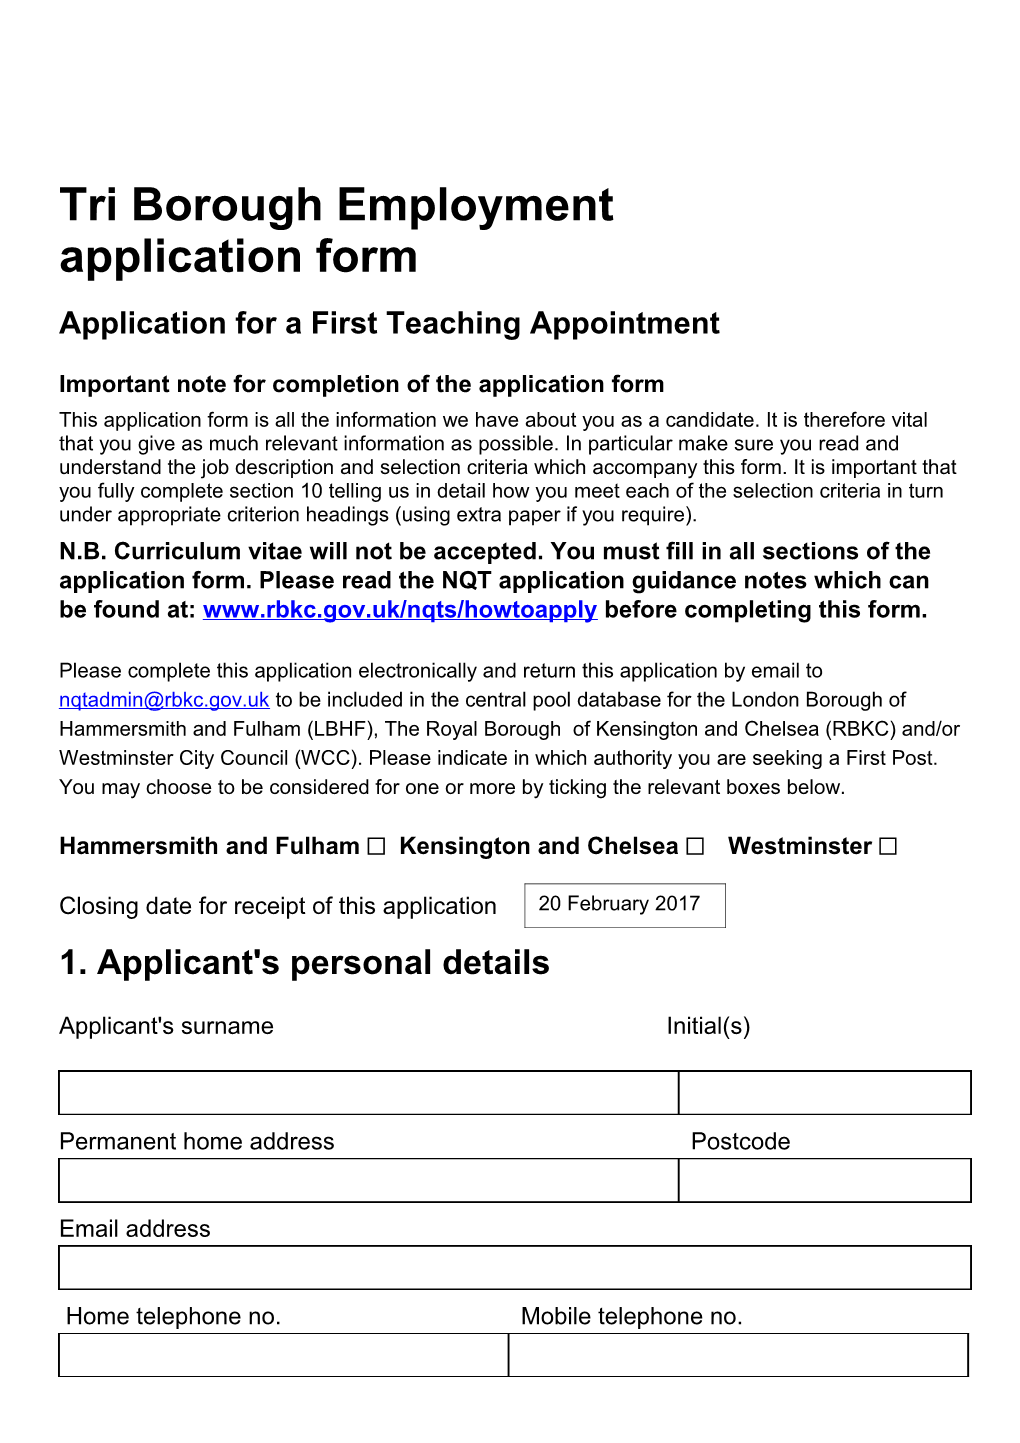 Application for a First Teaching Appointment